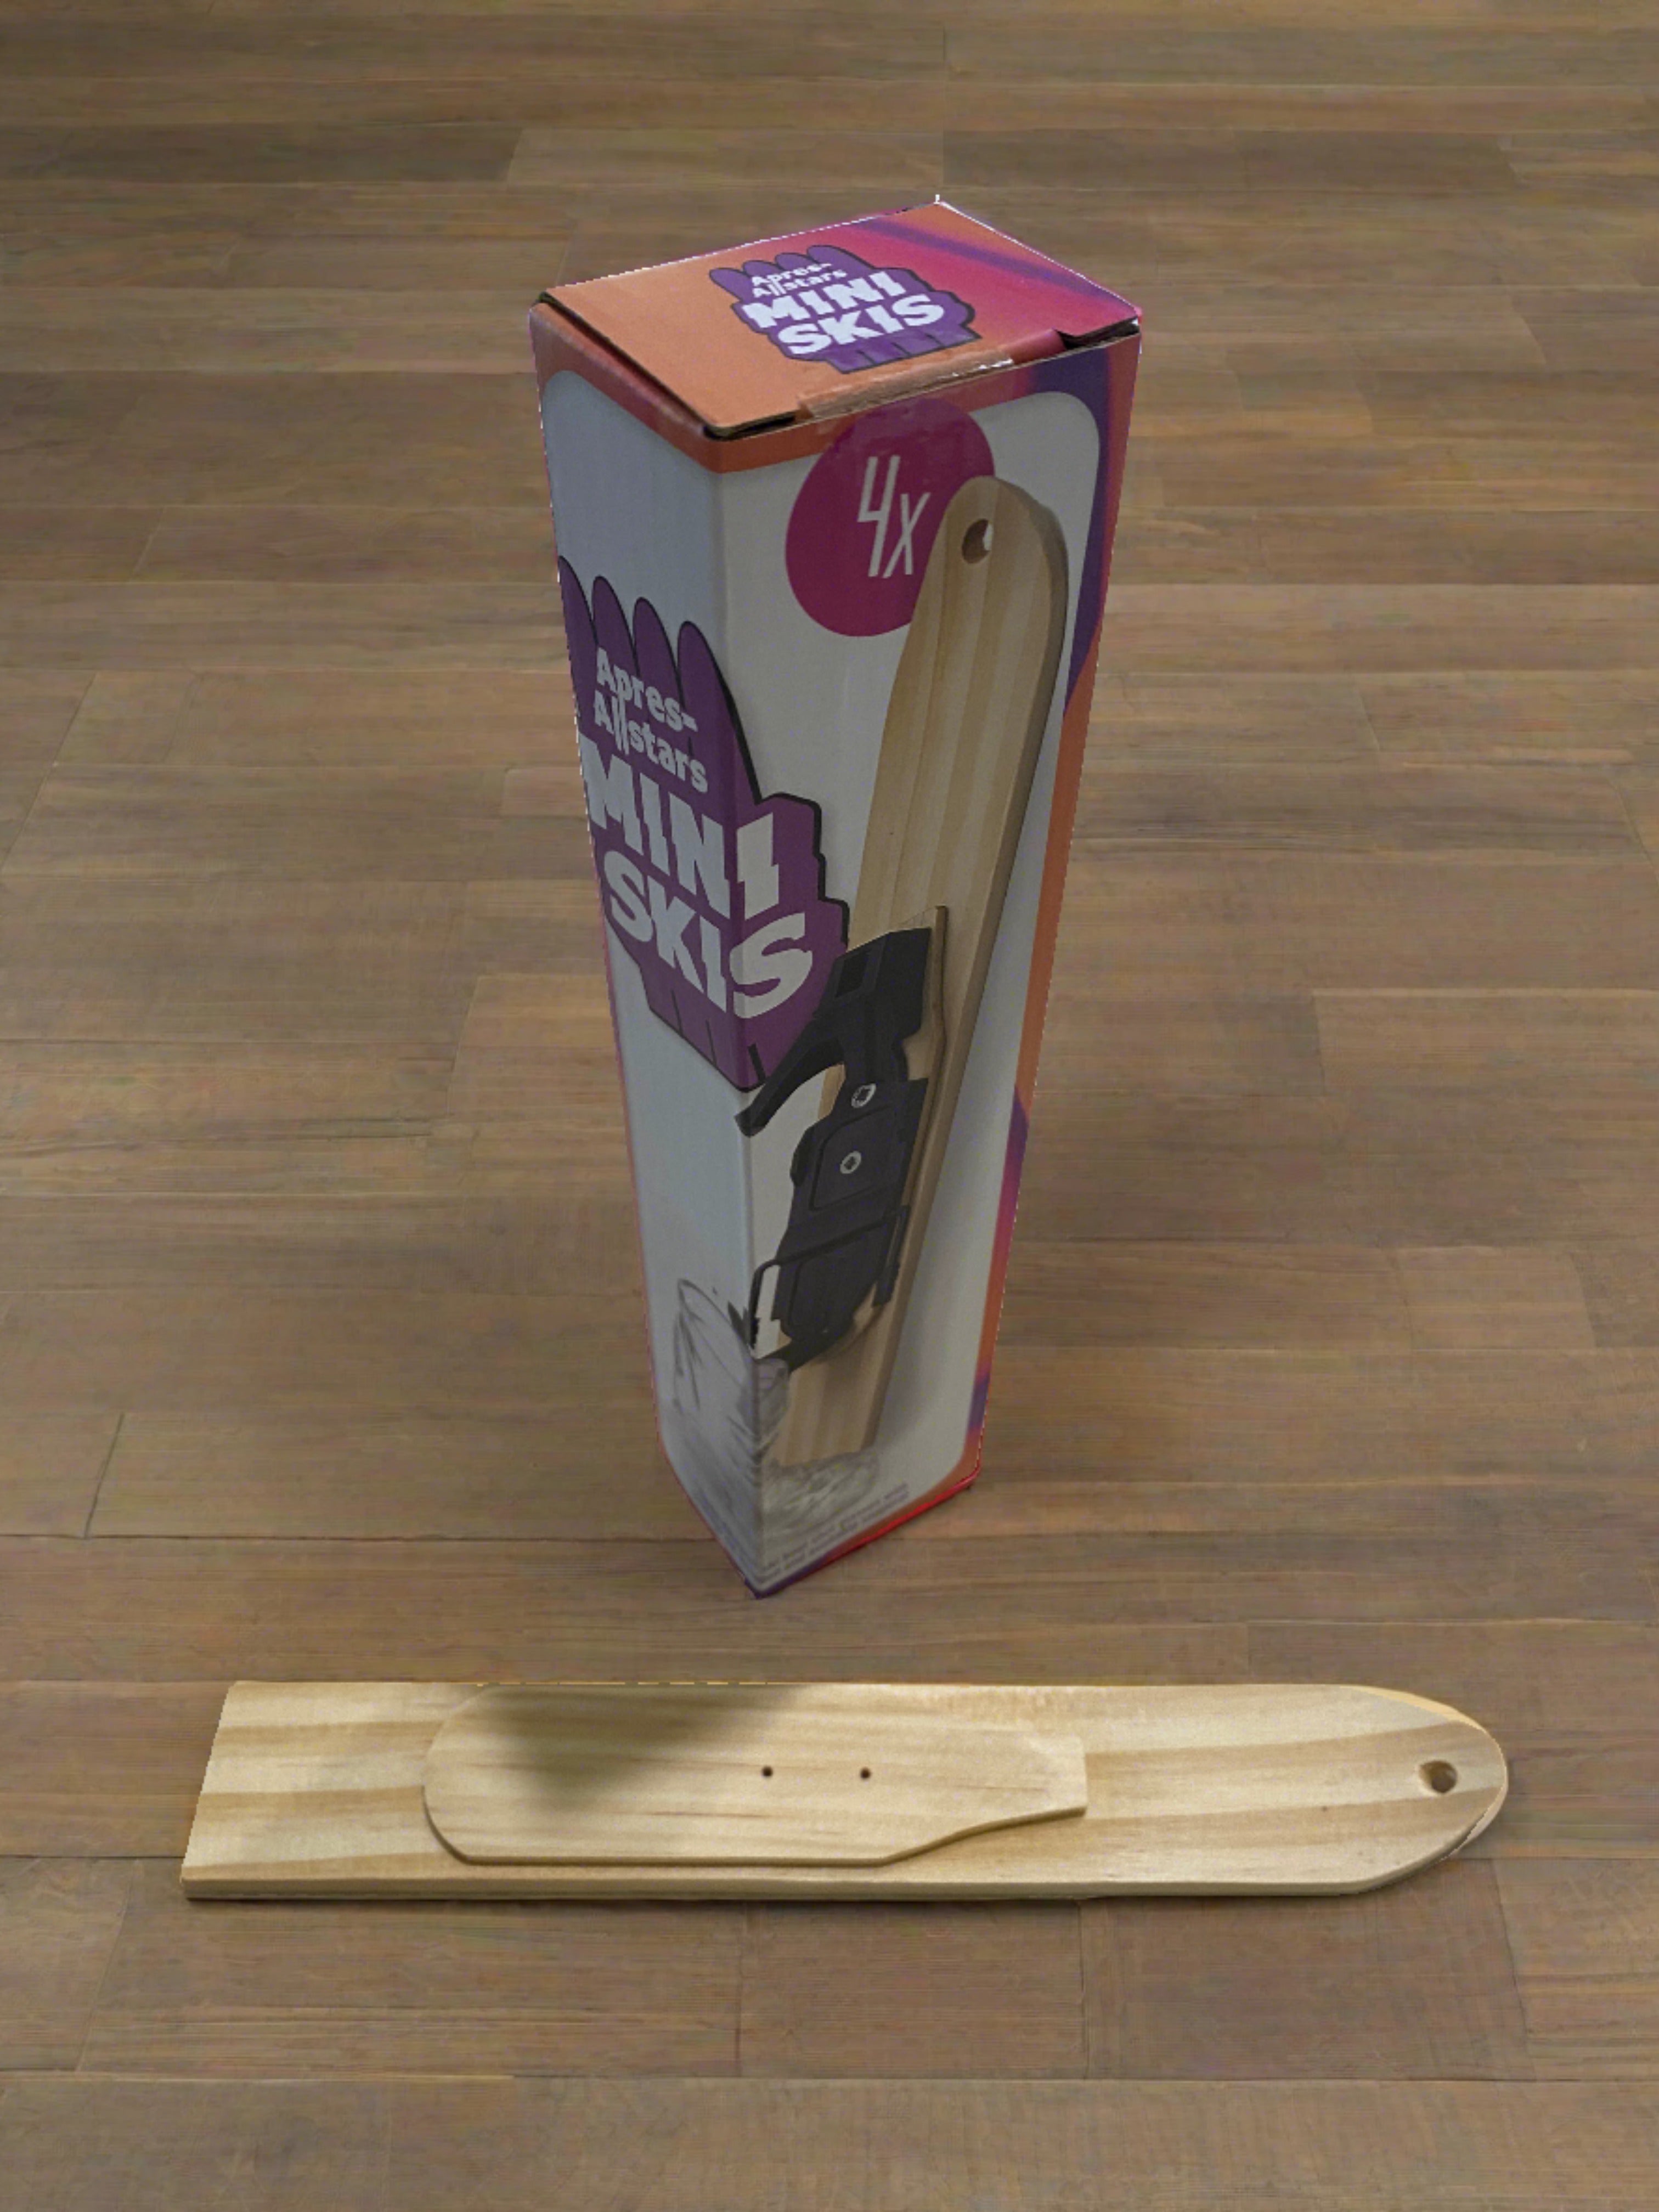 Photo of a wooden tray in the shape of small ski & the box it comes in. The ski tray has a hole drilled into the tip of the ski and a small raised mounting platform for the Apres Allstar boot shot glass and bindings. Image is set against a wooden backdrop